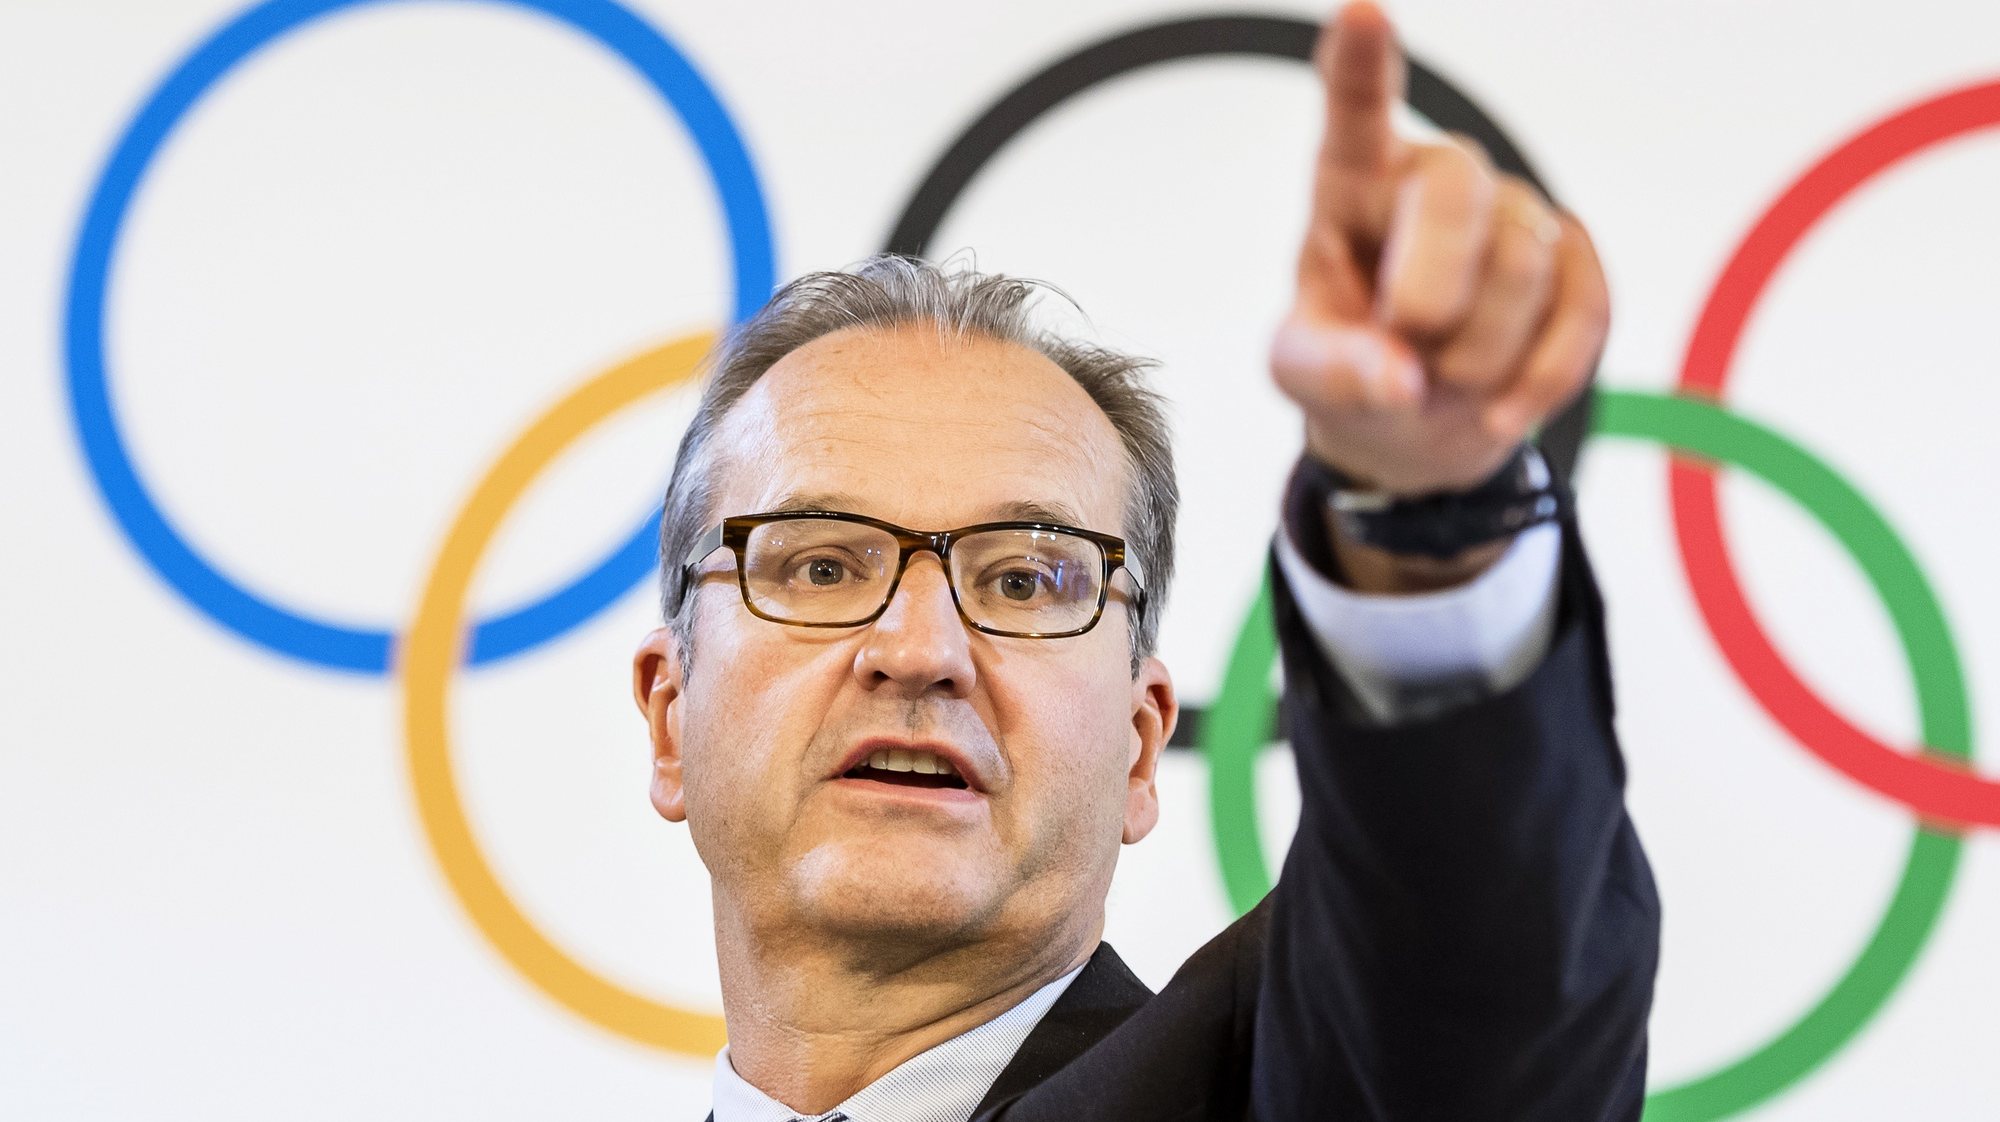 epa07661084 Mark Adams, spokesman for the International Olympic Committee (IOC), gestures during a press conference after the IOC executive board meeting in Lausanne, Switzerland, 20 June 2019.  EPA/JEAN-CHRISTOPHE BOTT